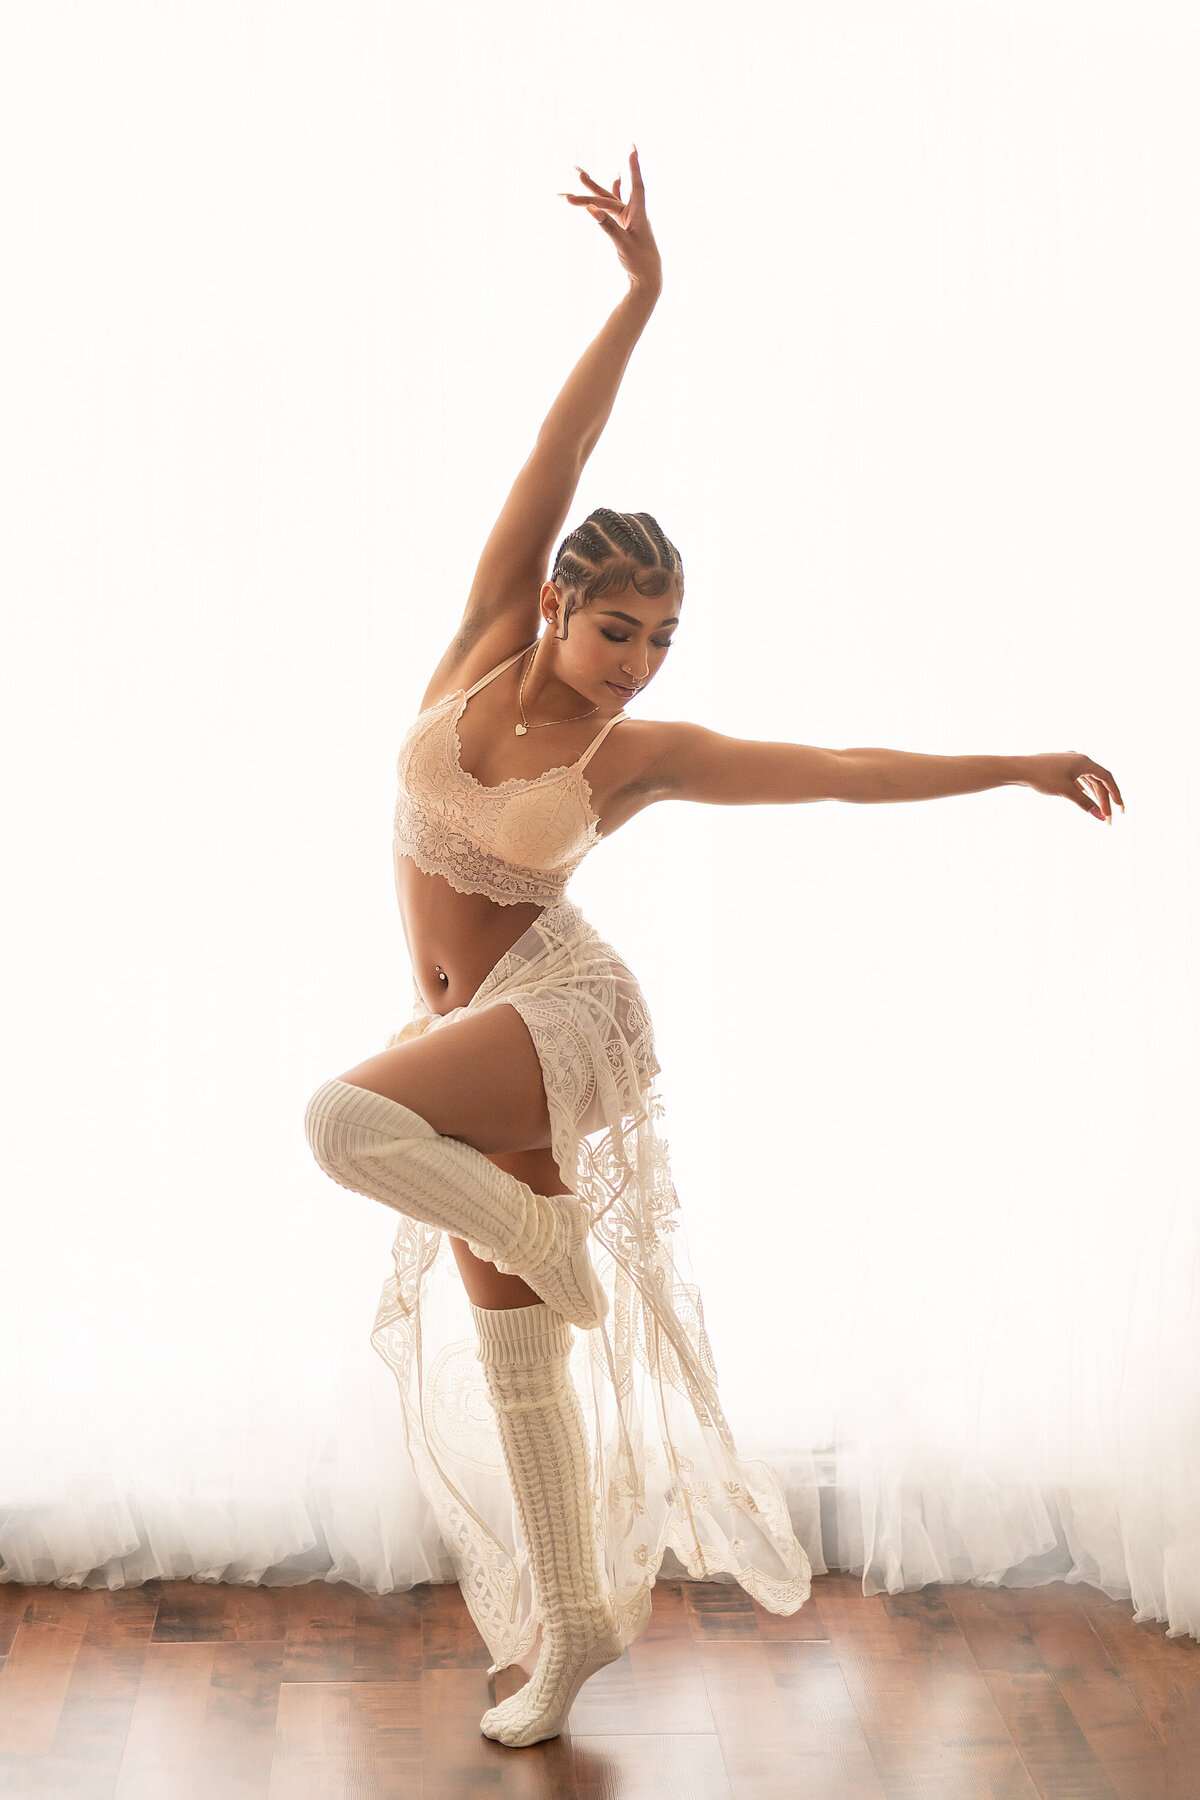 A dancer poses in all white lingerie for a boudoir session in our Waukesha, WI photo studio.